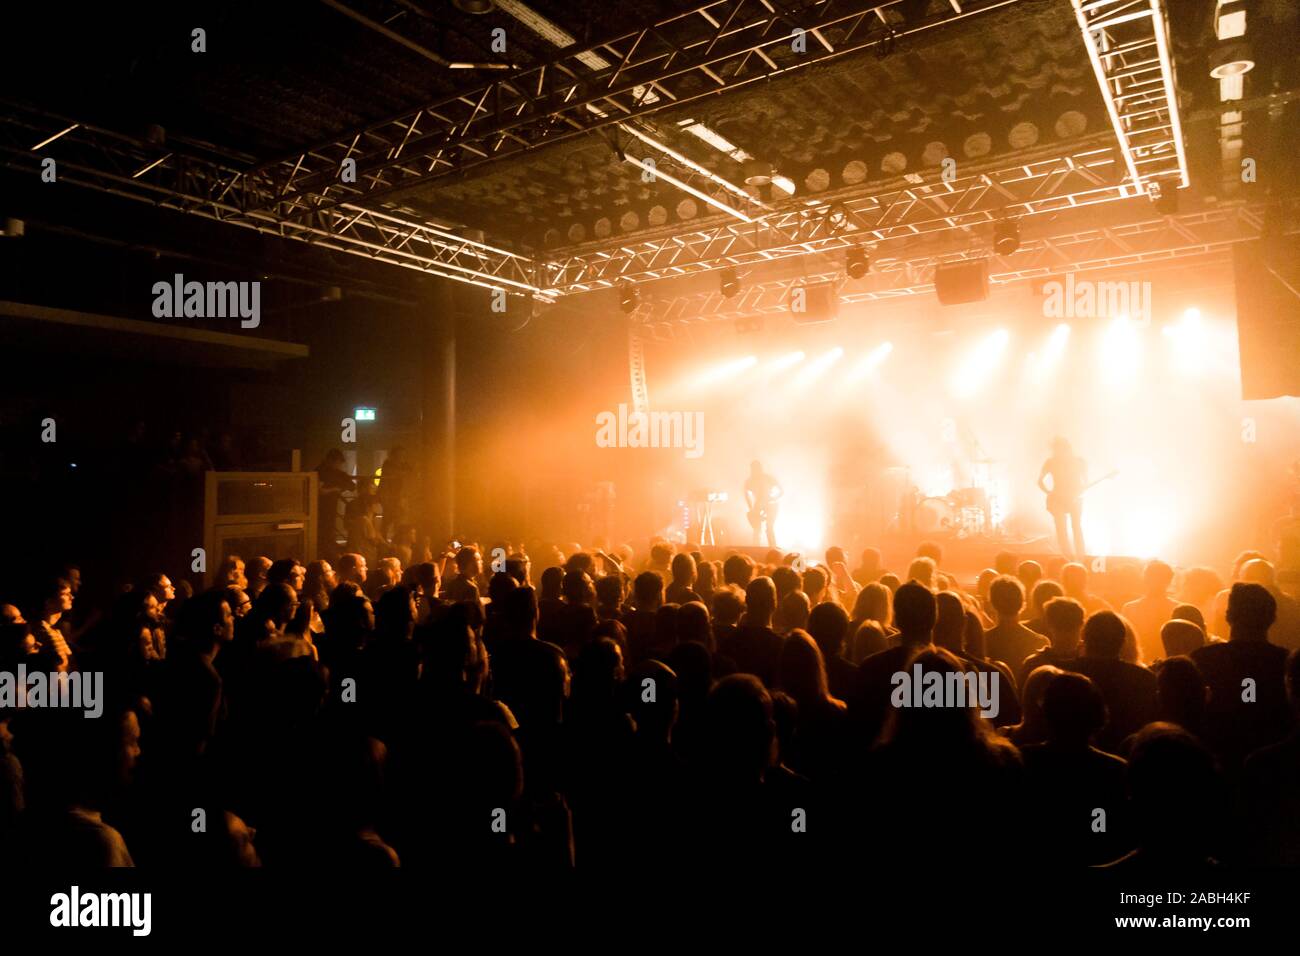 Leeds/UK - 15th May 2018 - Russian Circles band live at Leeds Stylus  concert with smokey stage and crowd Stock Photo - Alamy